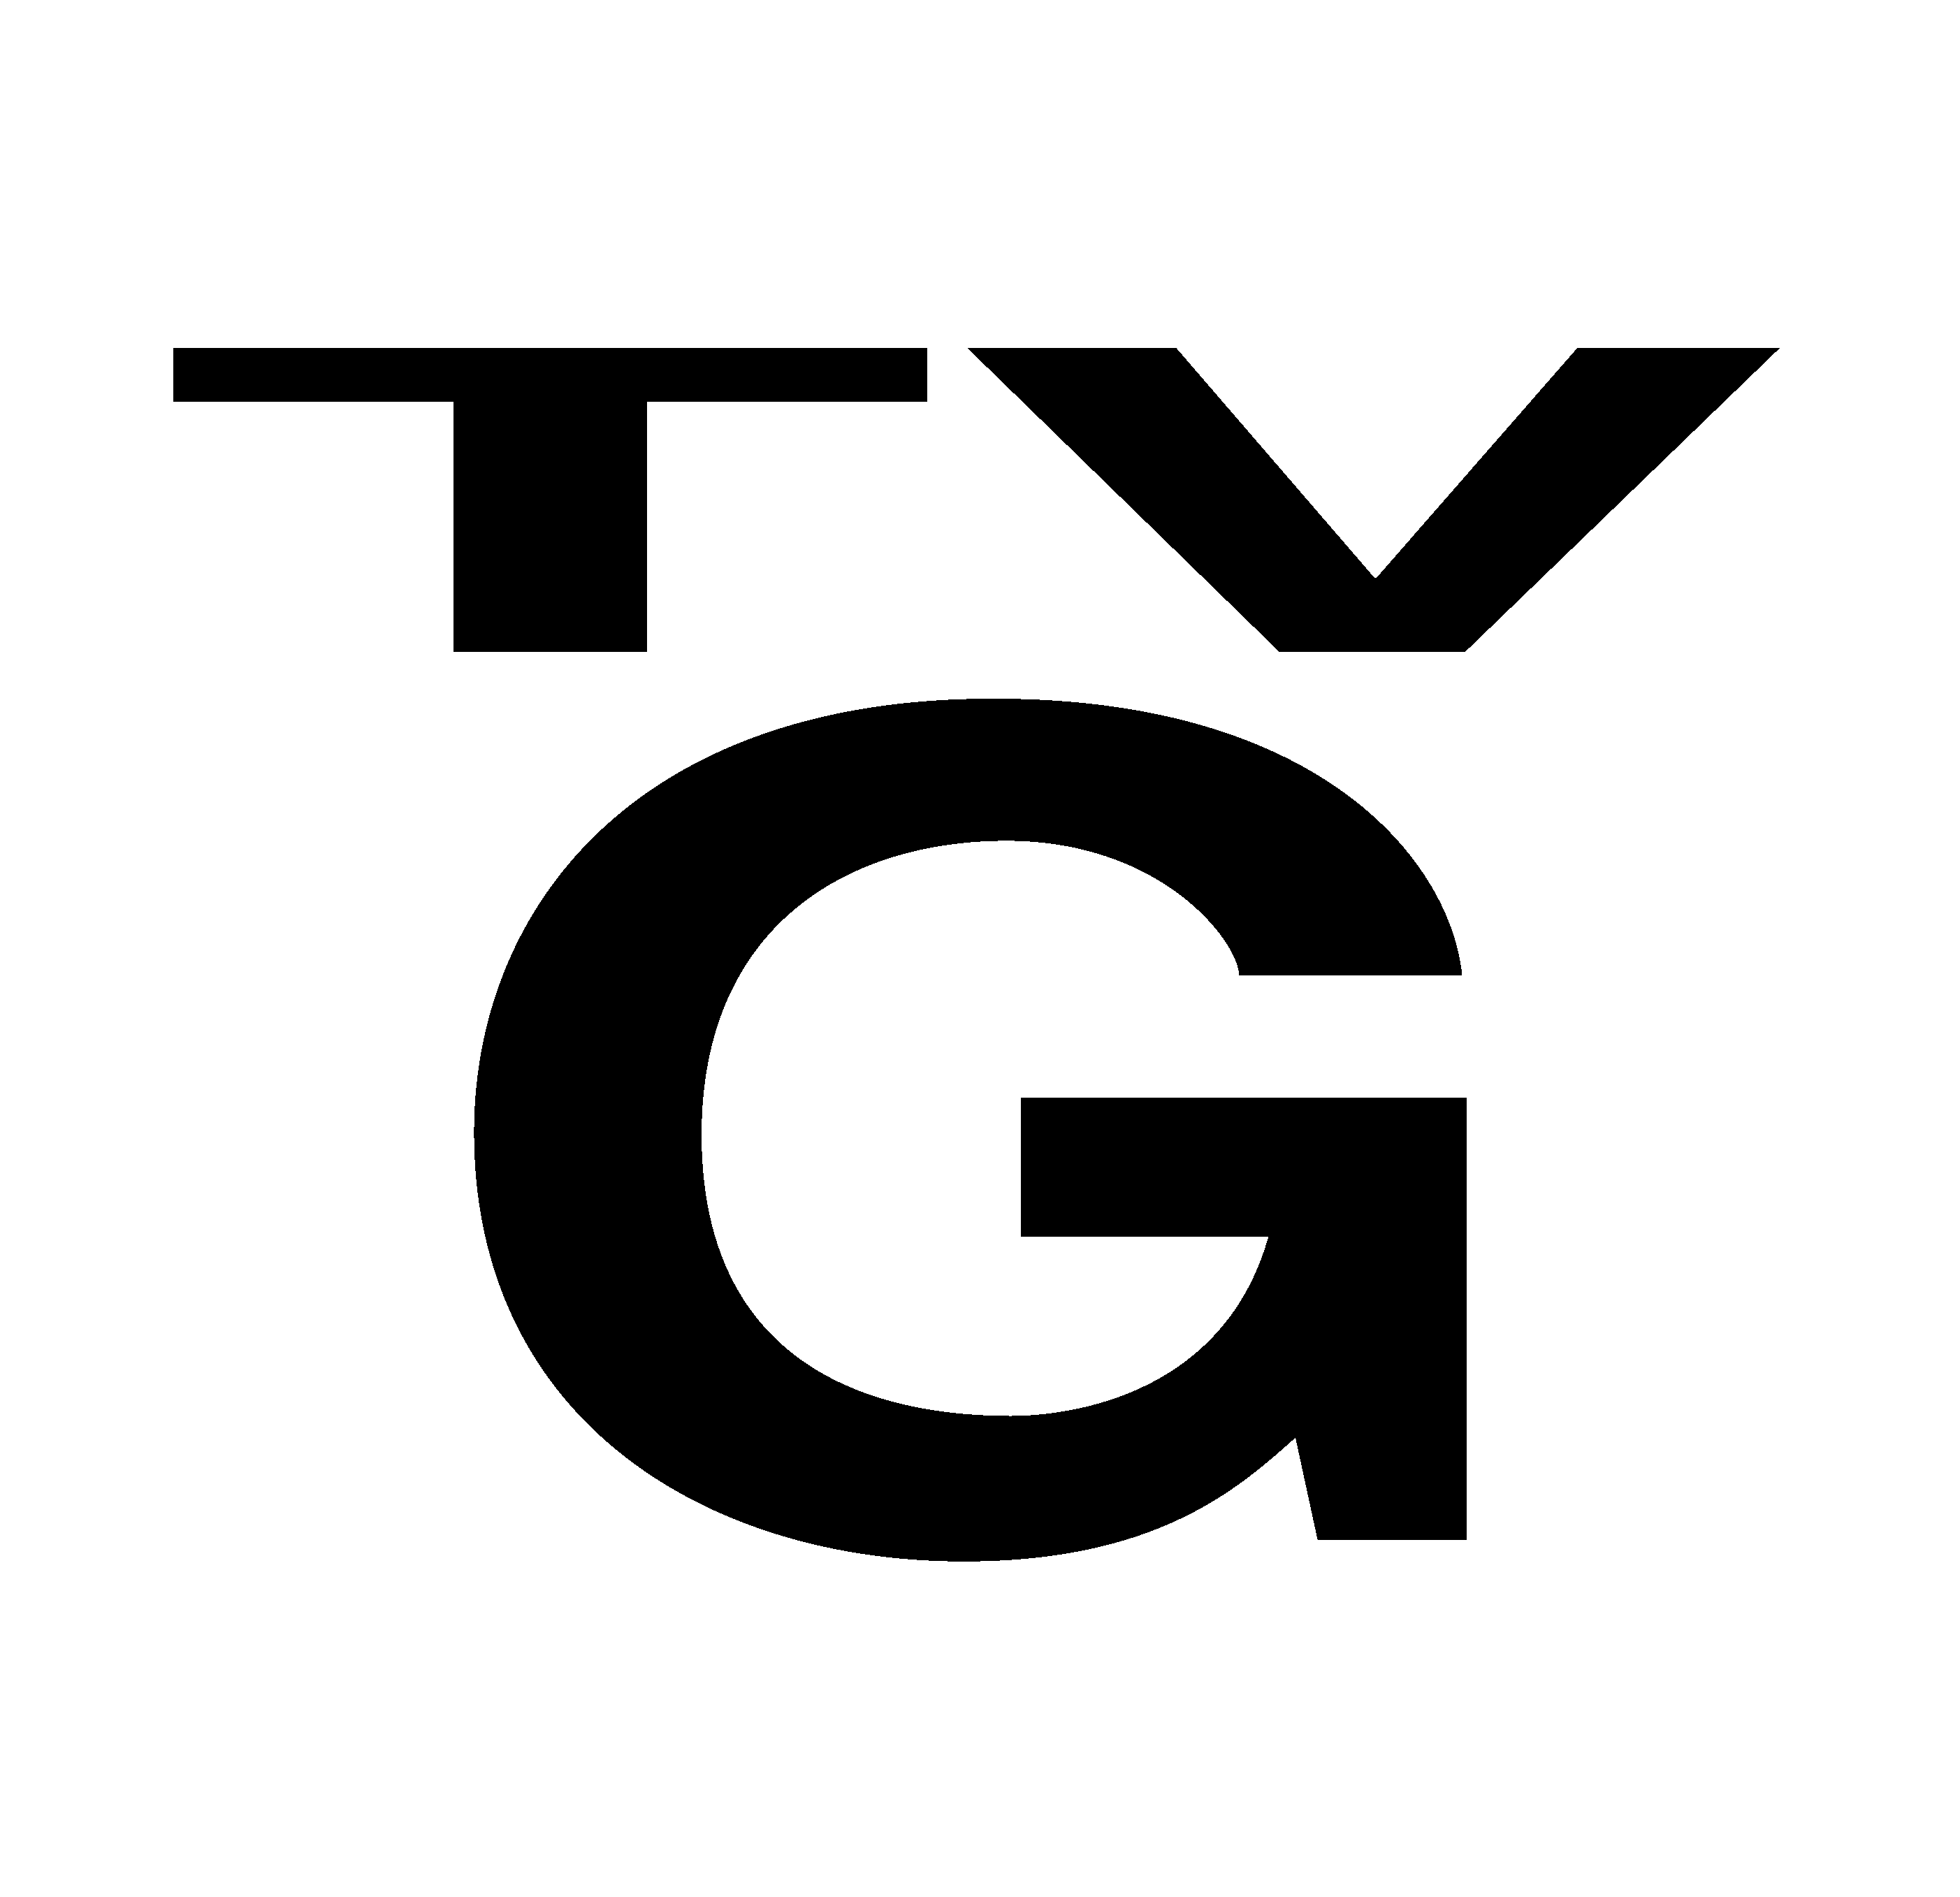 TV-Y7 CC Logo - File:White TV-G icon.png - Wikimedia Commons